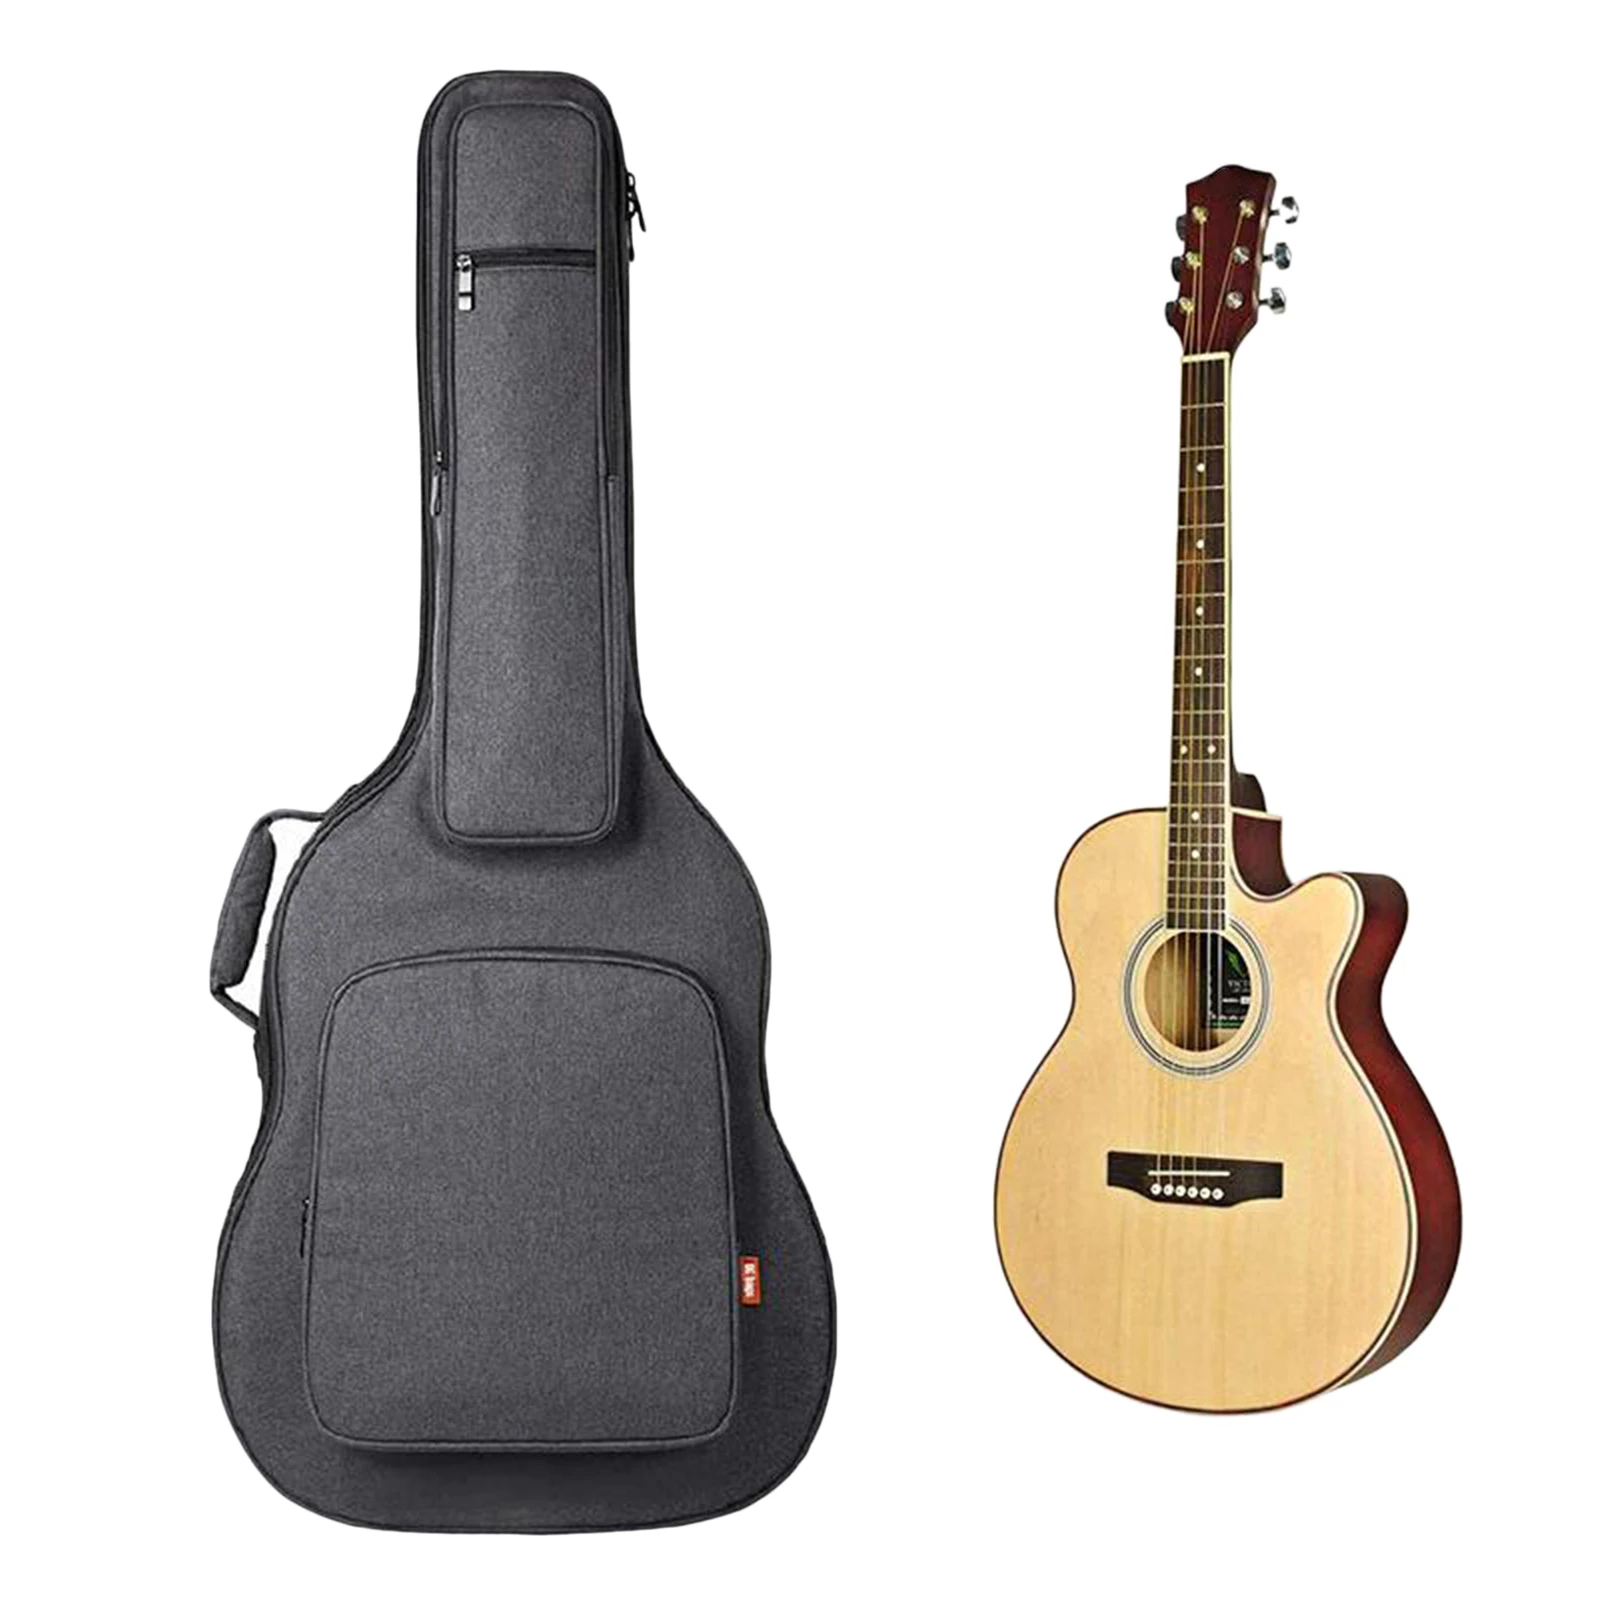 41 inch Electric Guitar Bag Waterproof Dustproof Soft Case for Home Storage